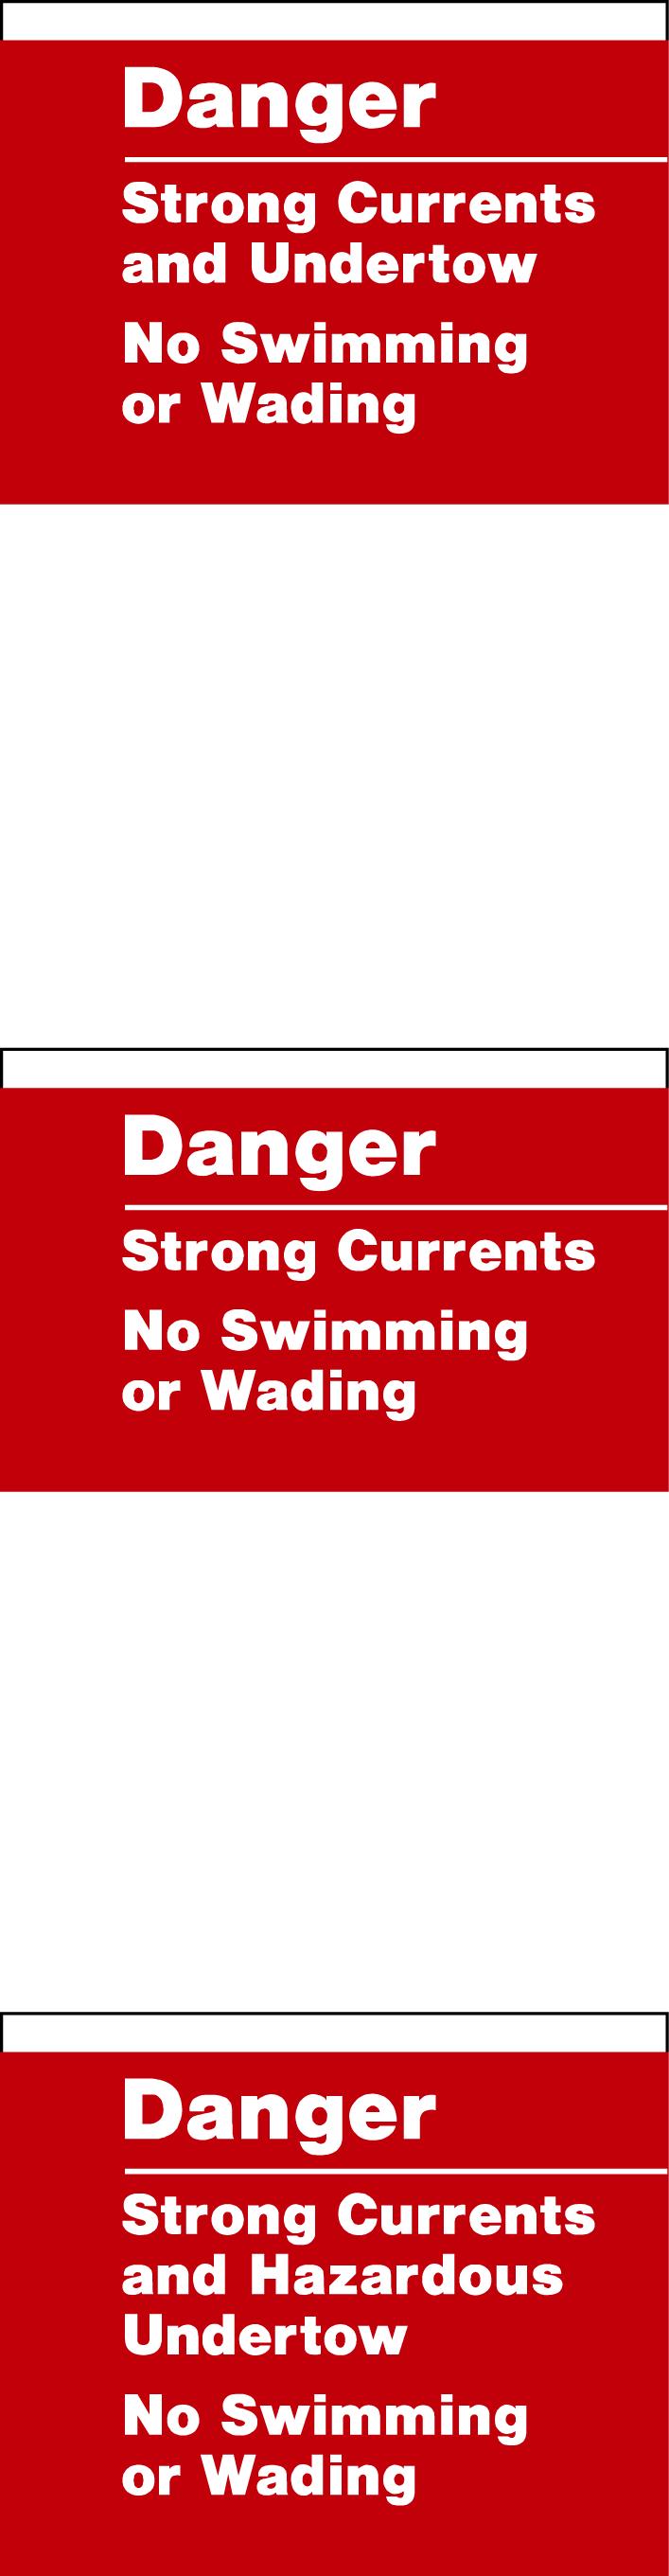 EP 31016a Danger: Strong Currents, No Swimming The Danger signs shown below are used to identify a dangerous waterway or shoreline condition, and establish prohibitions for swimming or wading.